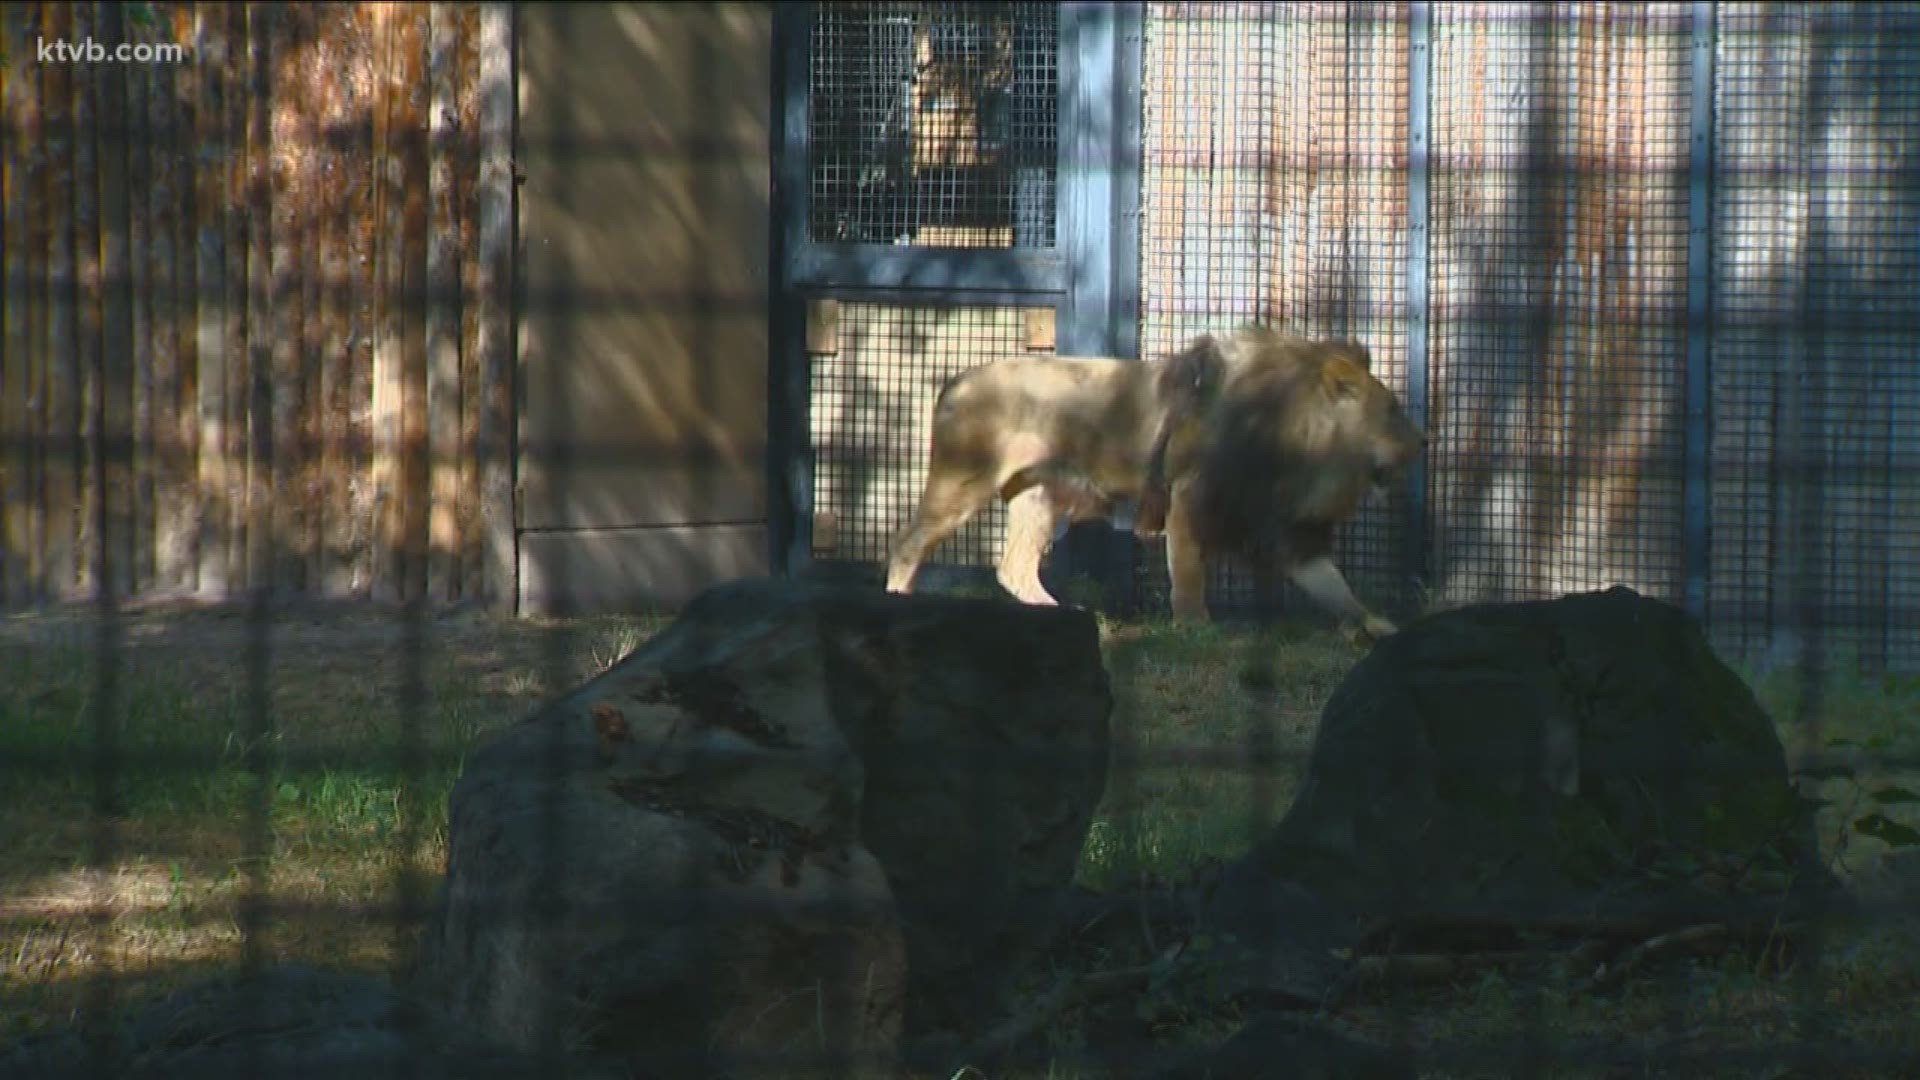 Revan the lion makes his debut at Zoo Boise.